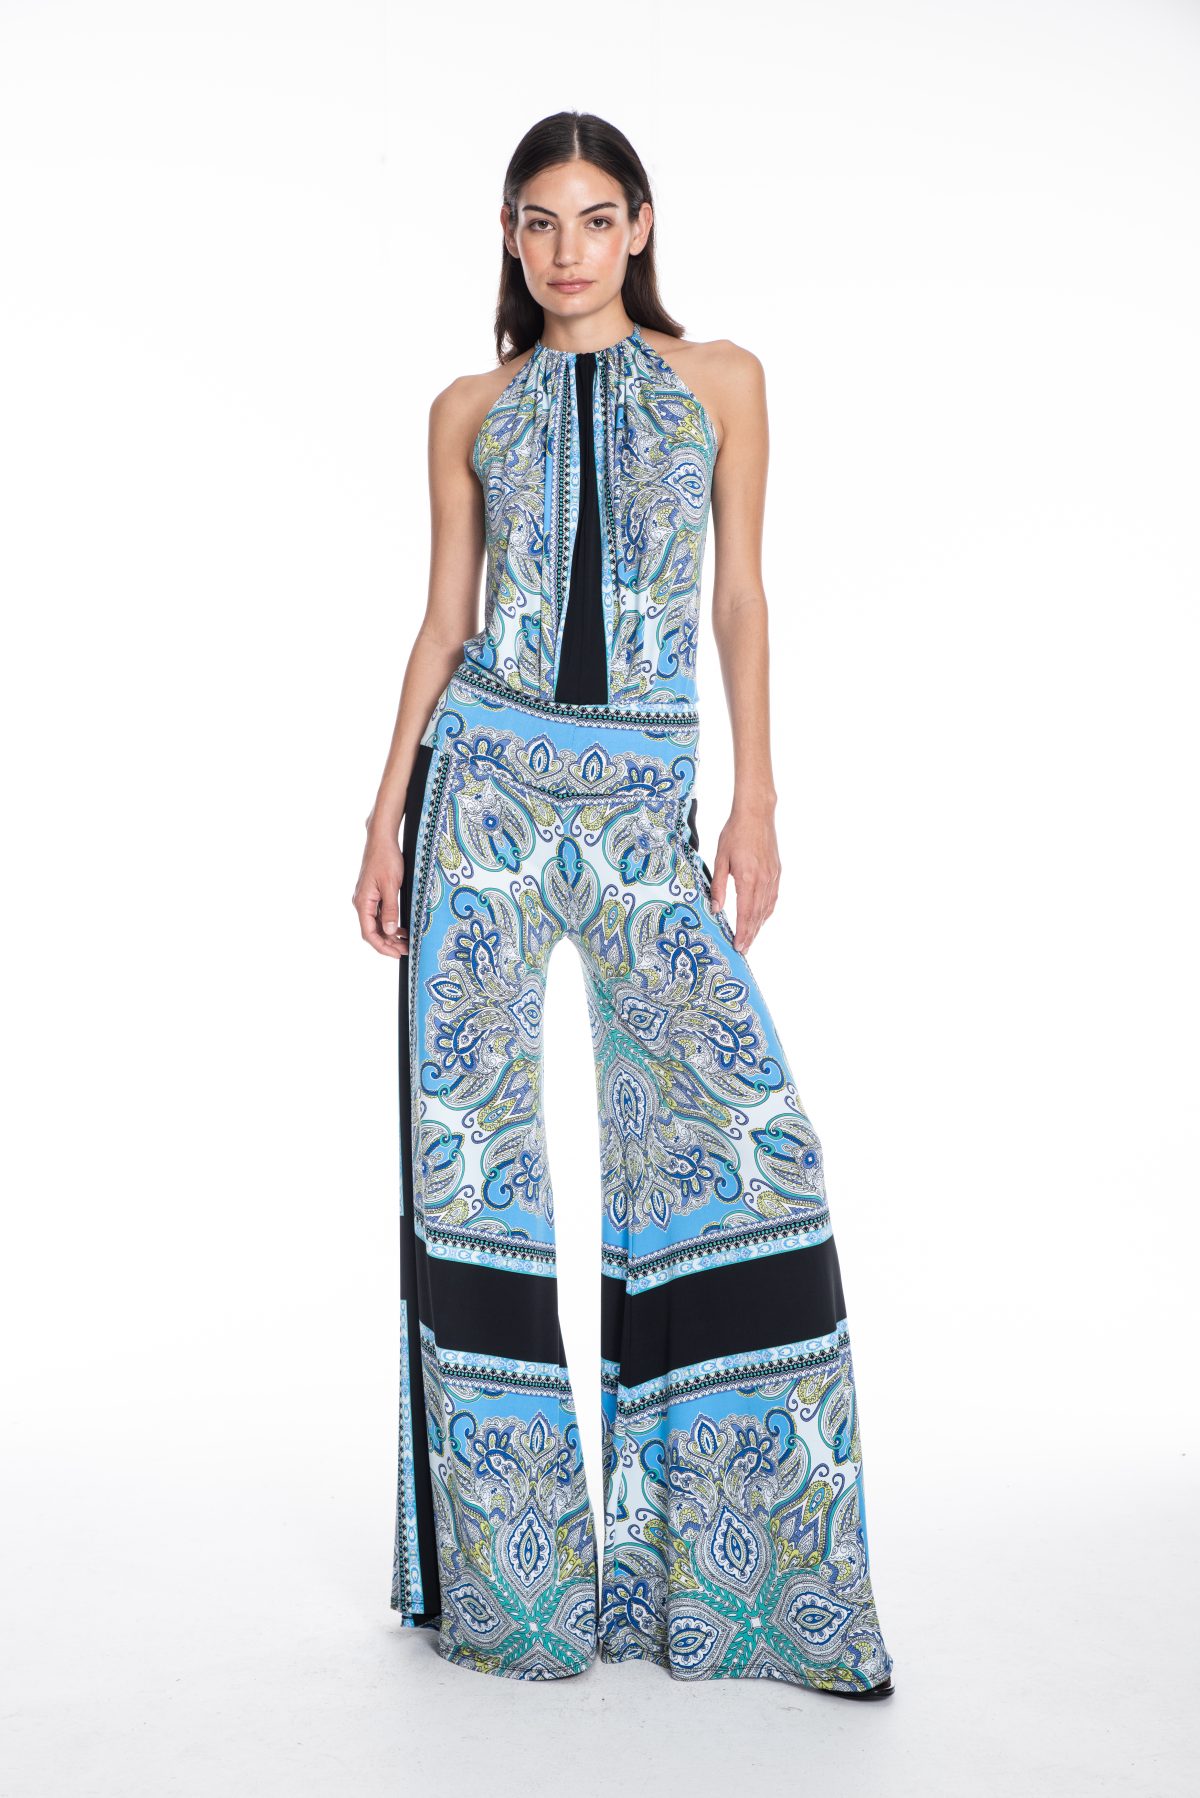 Julian Chang 1001 Blue Scarf Walter Halter Neck Jumpsuit | Ooh Ooh Shoes women's clothing and shoe boutique located in Naples and Mashpee